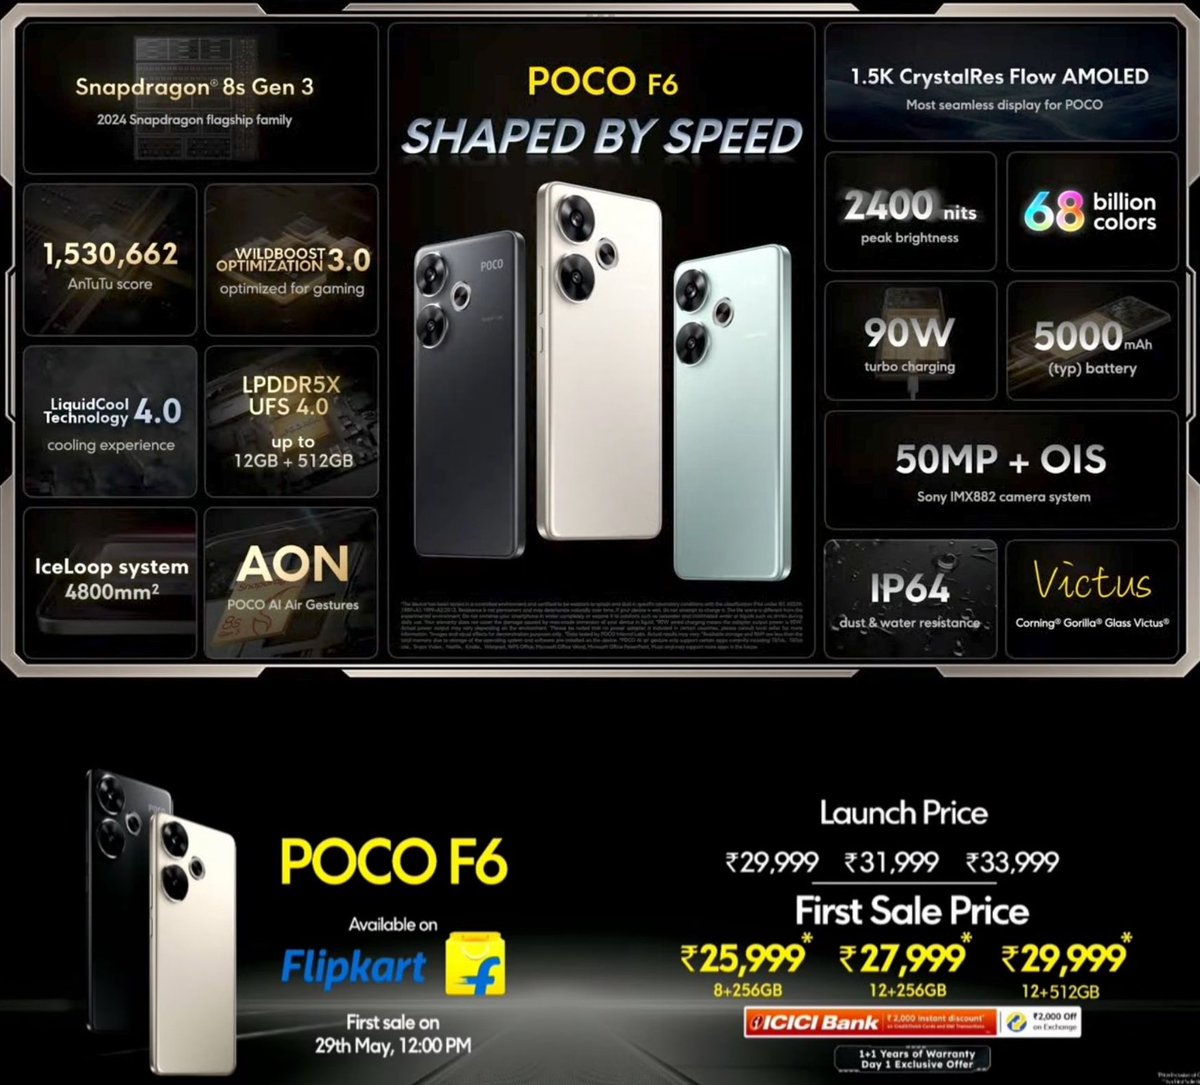 POCO F6 launched in India, Price Starts at ₹29,999 for the base 8/256GB Variant. Kya kehte ho 1st Snapdragon 8s Gen 3 waala phone hai bhot power hai. POCO F6 Price without Offers - - 8/256GB: ₹29,999 - 12/256GB: ₹31,999 - 12/512GB: ₹33,999 POCO F6 Price Inclusive of